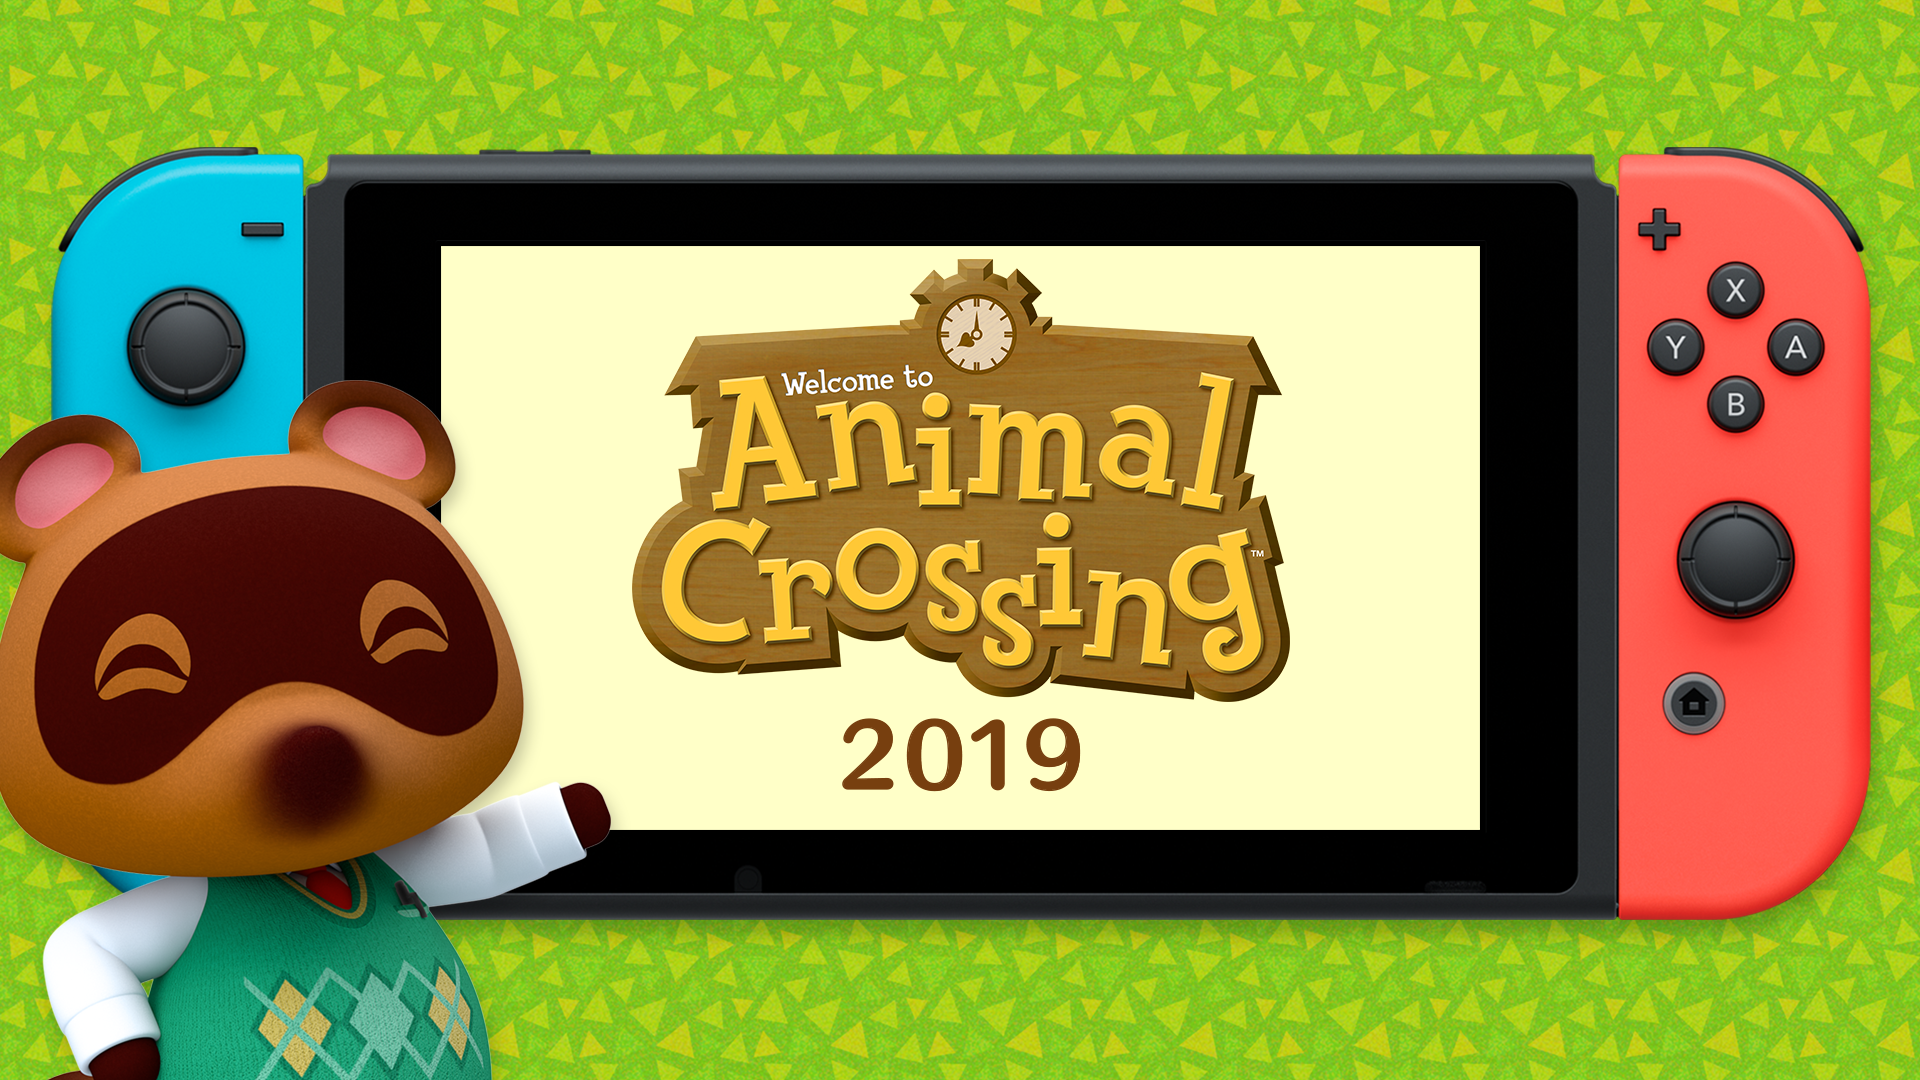 Image of the Switch screen with the Animal Crossing logo and 2019 written below it, with Tom Nook in front.